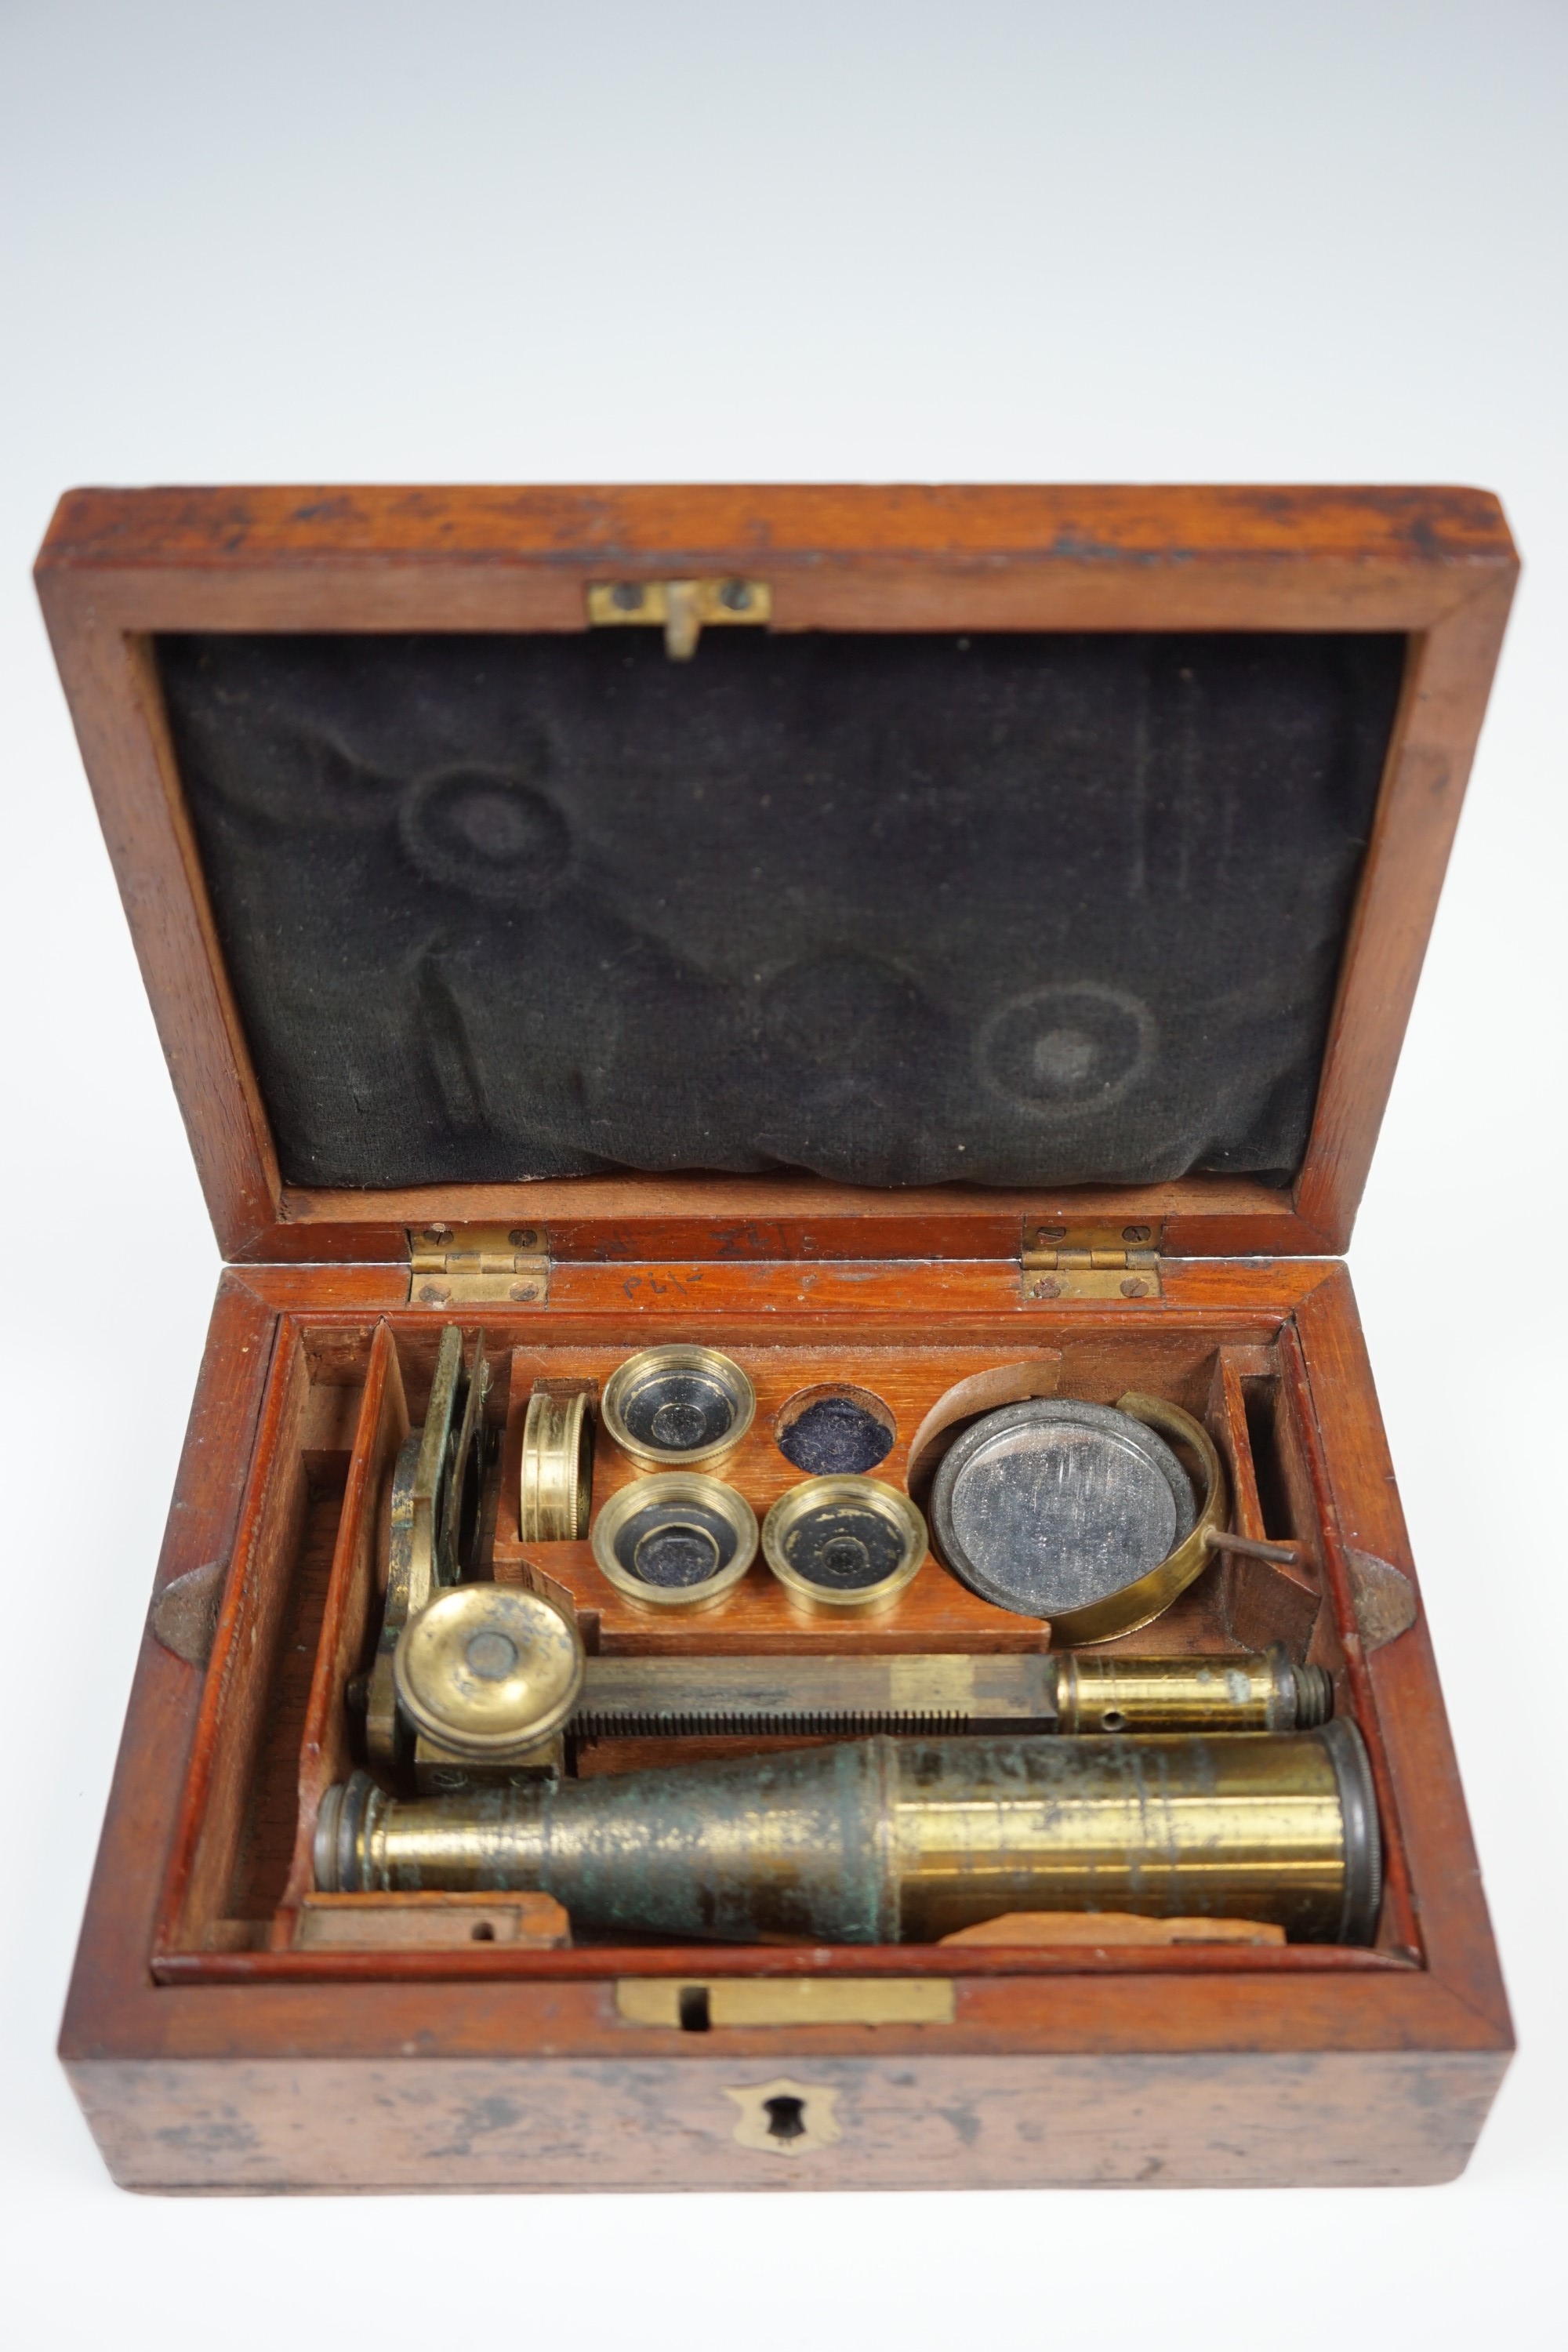 A late Georgian Cary Gould type "second size" portable compound monocular microscope, in lacquered